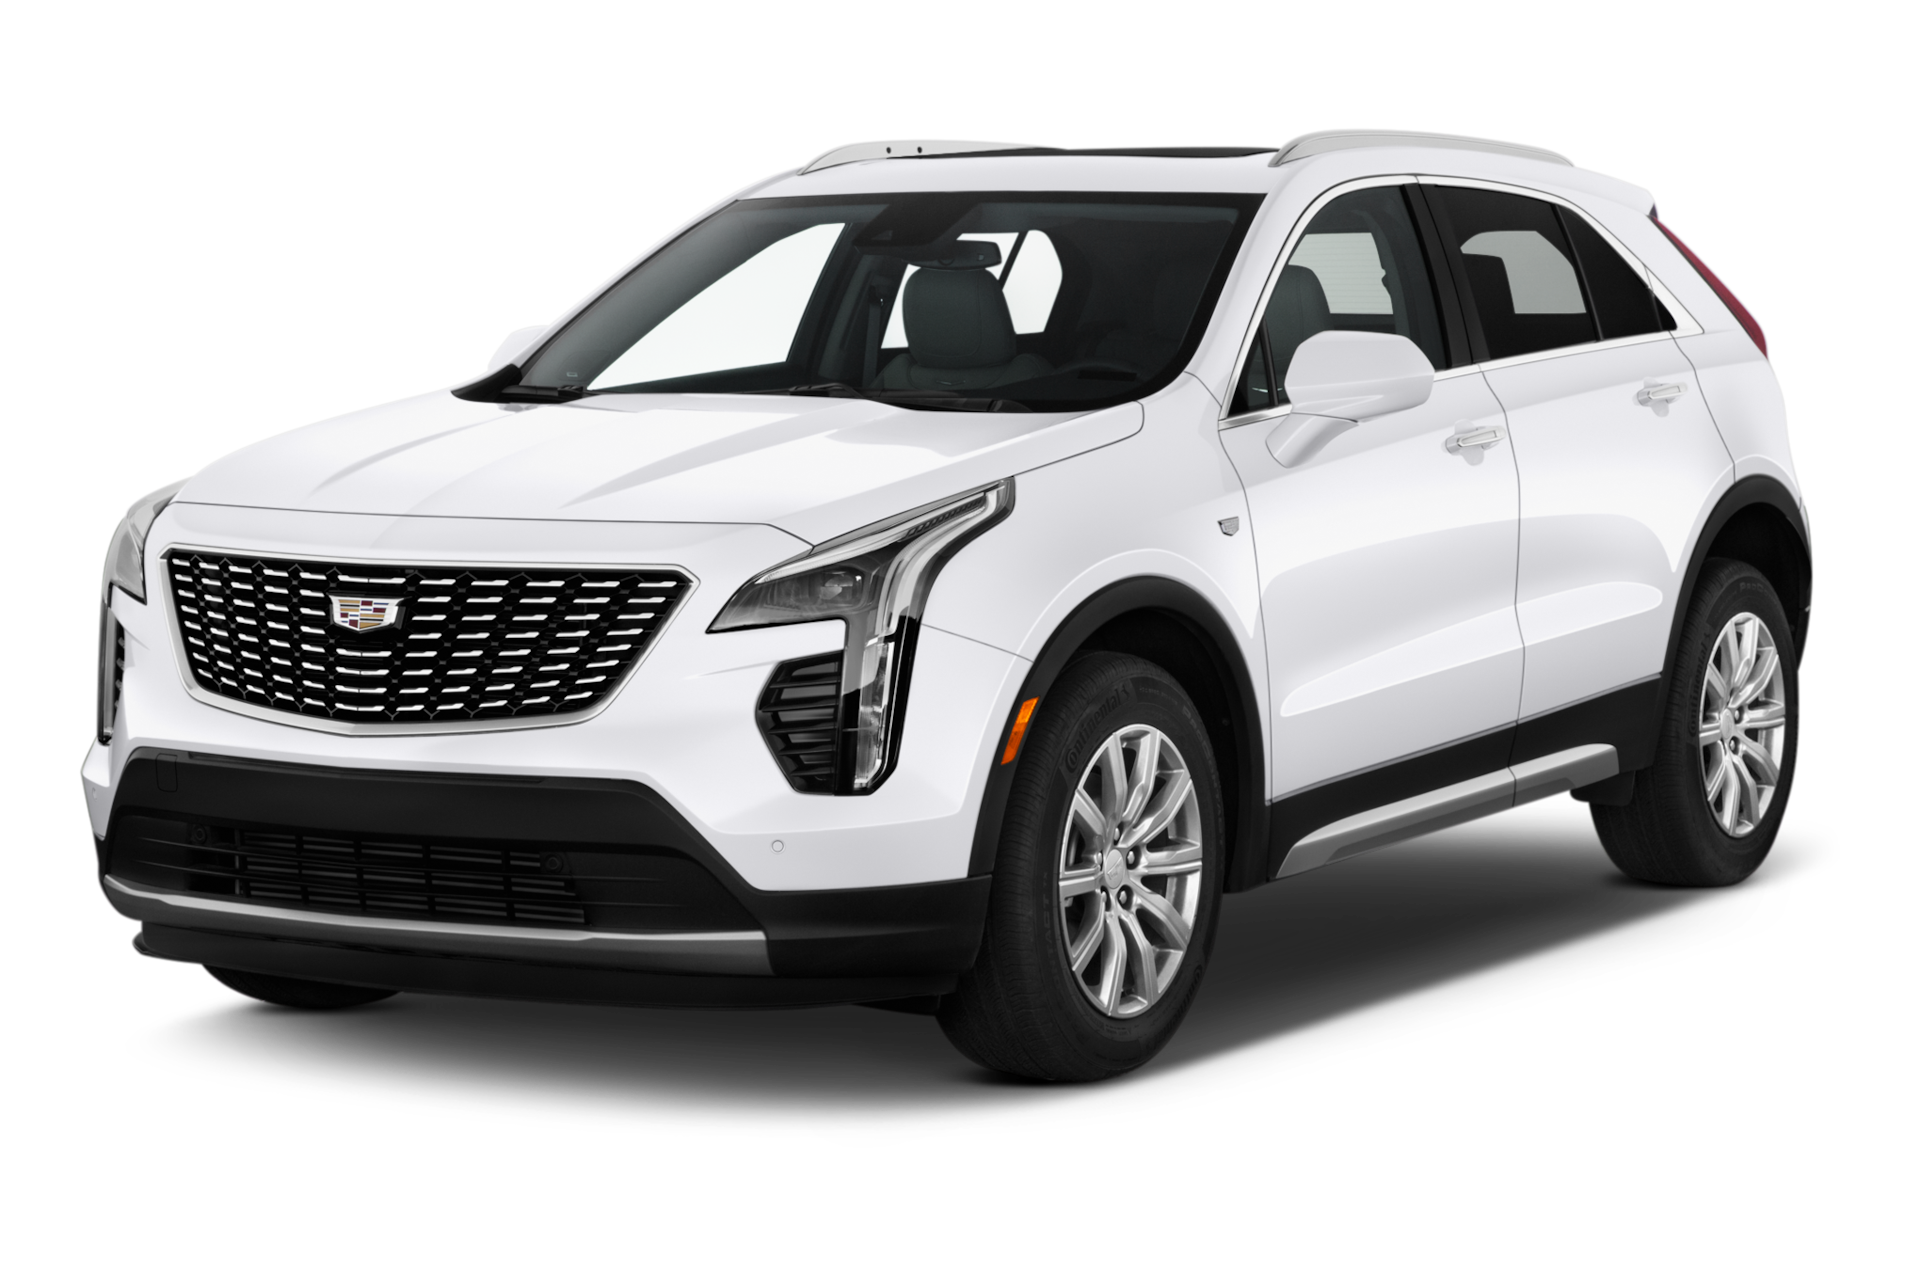 2020 Cadillac XT4 Prices, Reviews, and Photos - MotorTrend